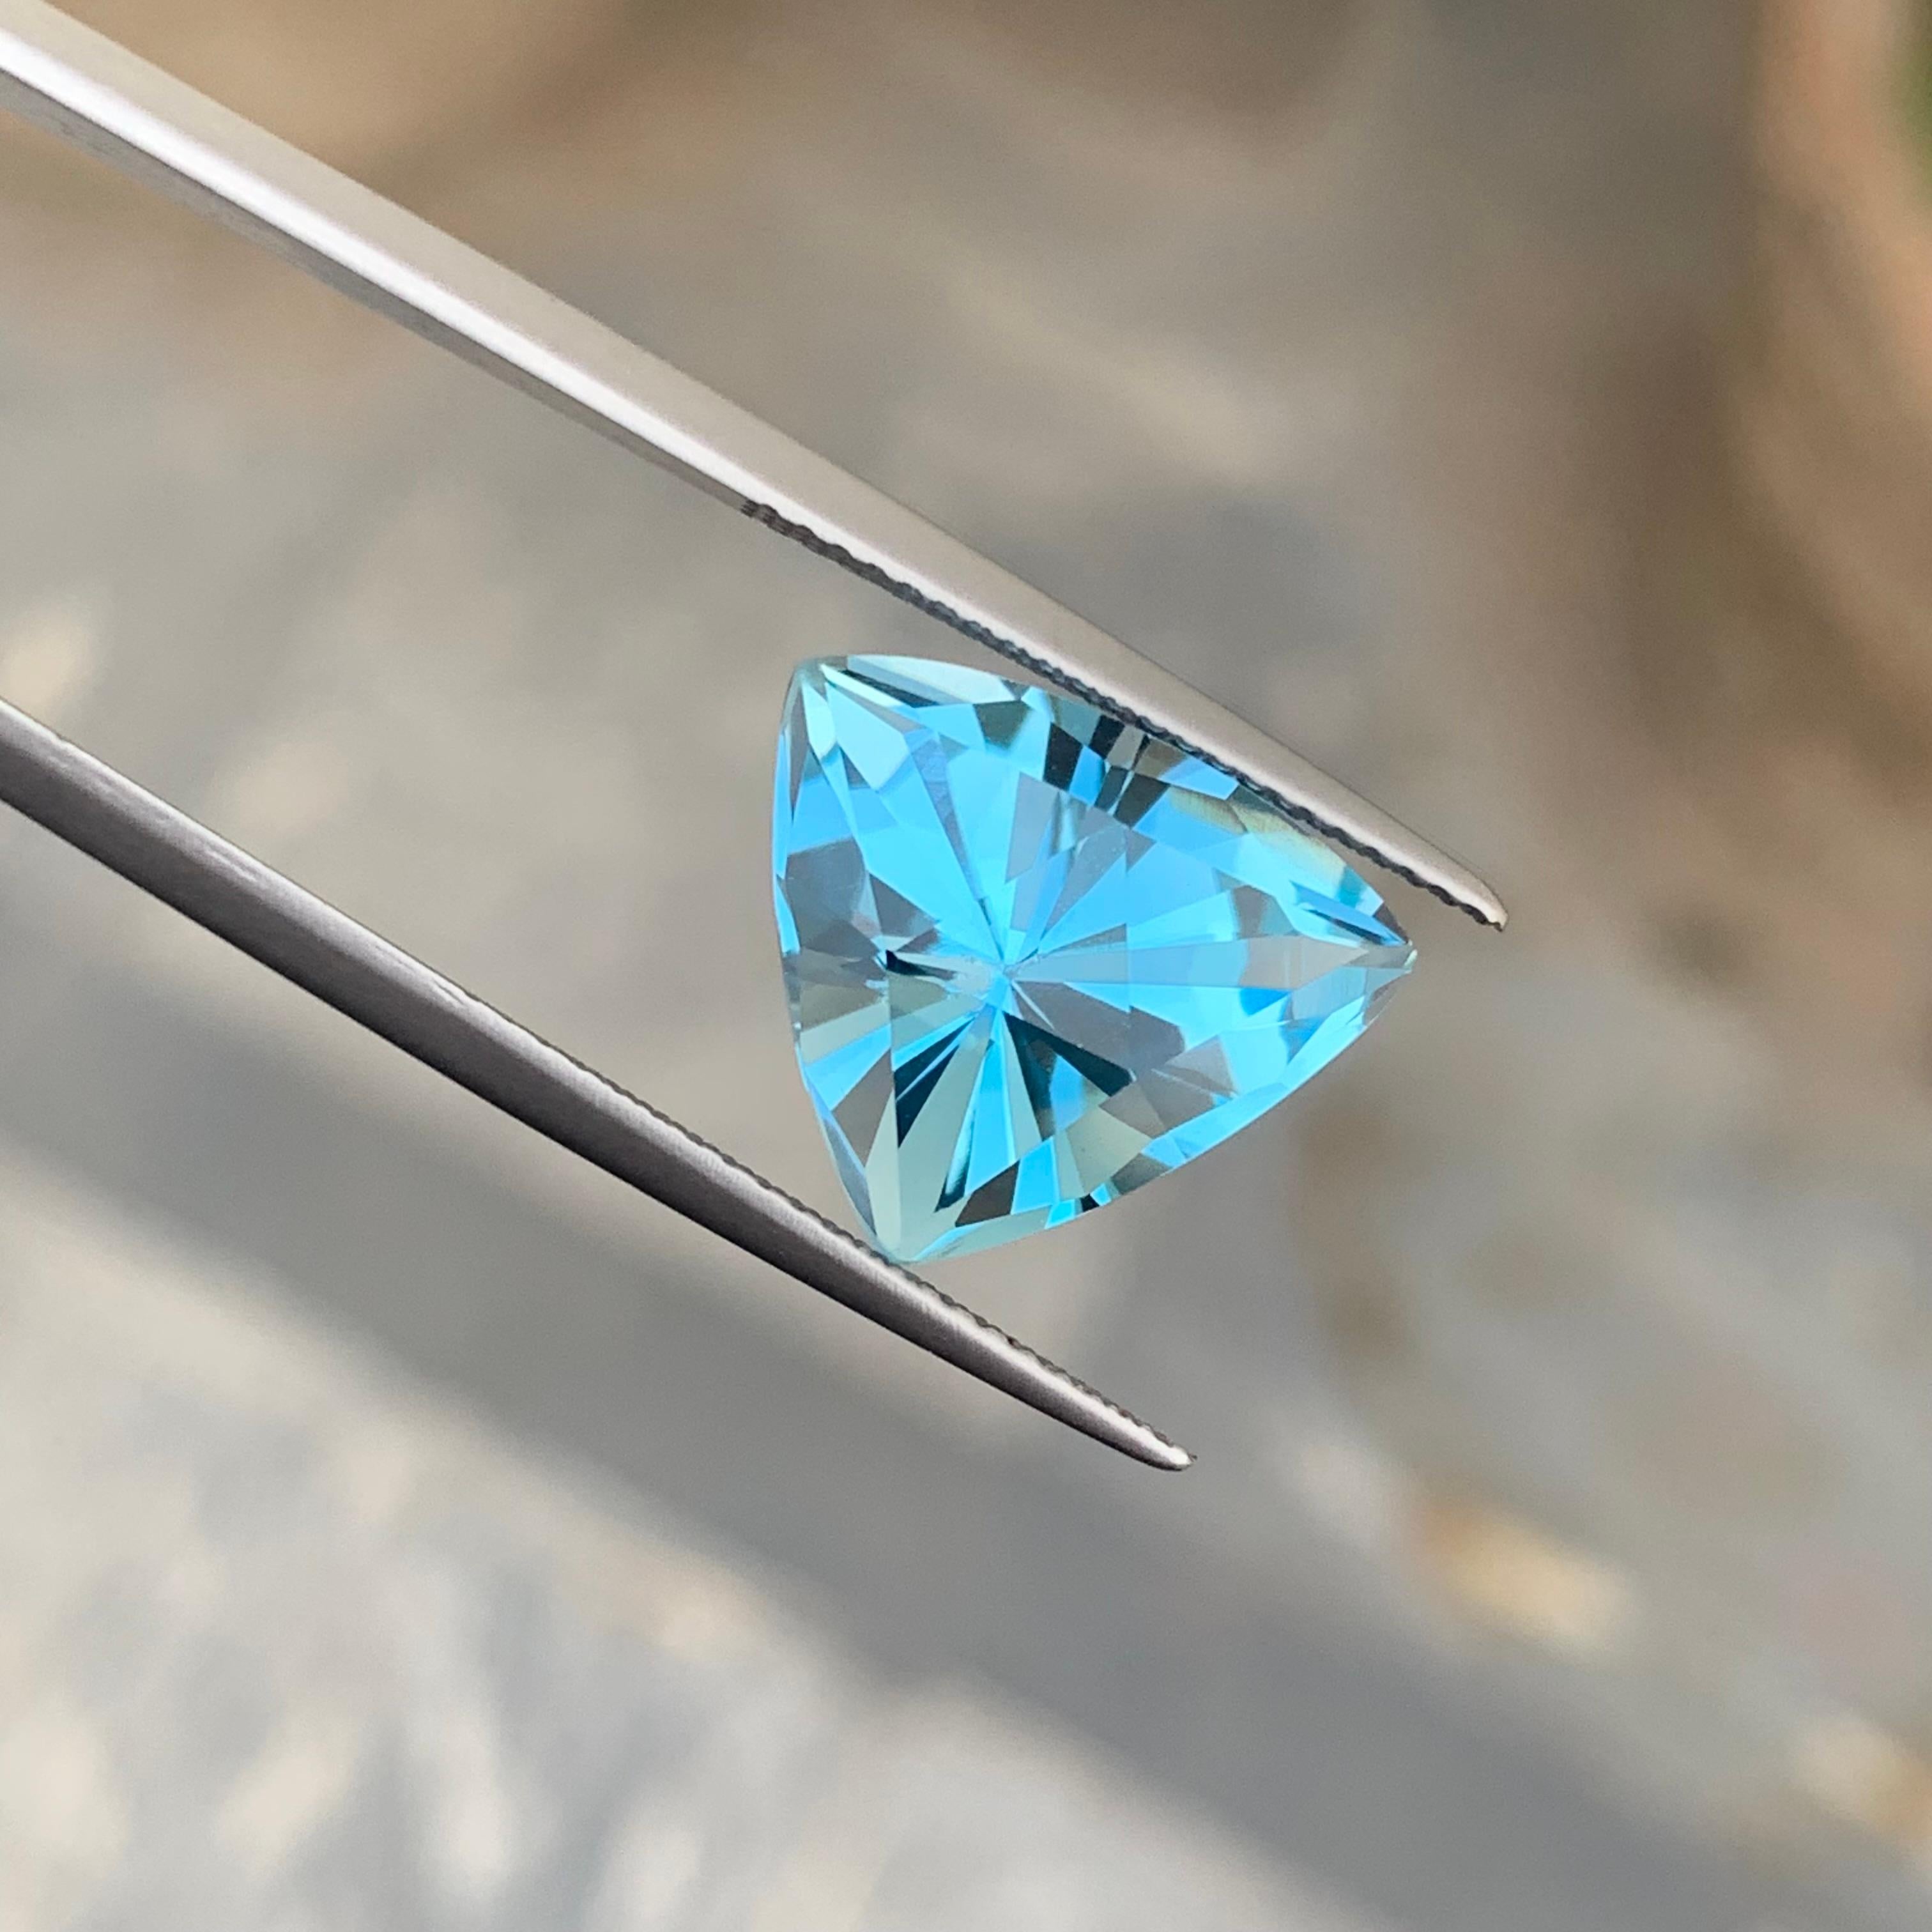 Arts and Crafts Genuine 9.0 Carat Trillion Cut Loose Blue Topaz from Brazil Available for Sell For Sale